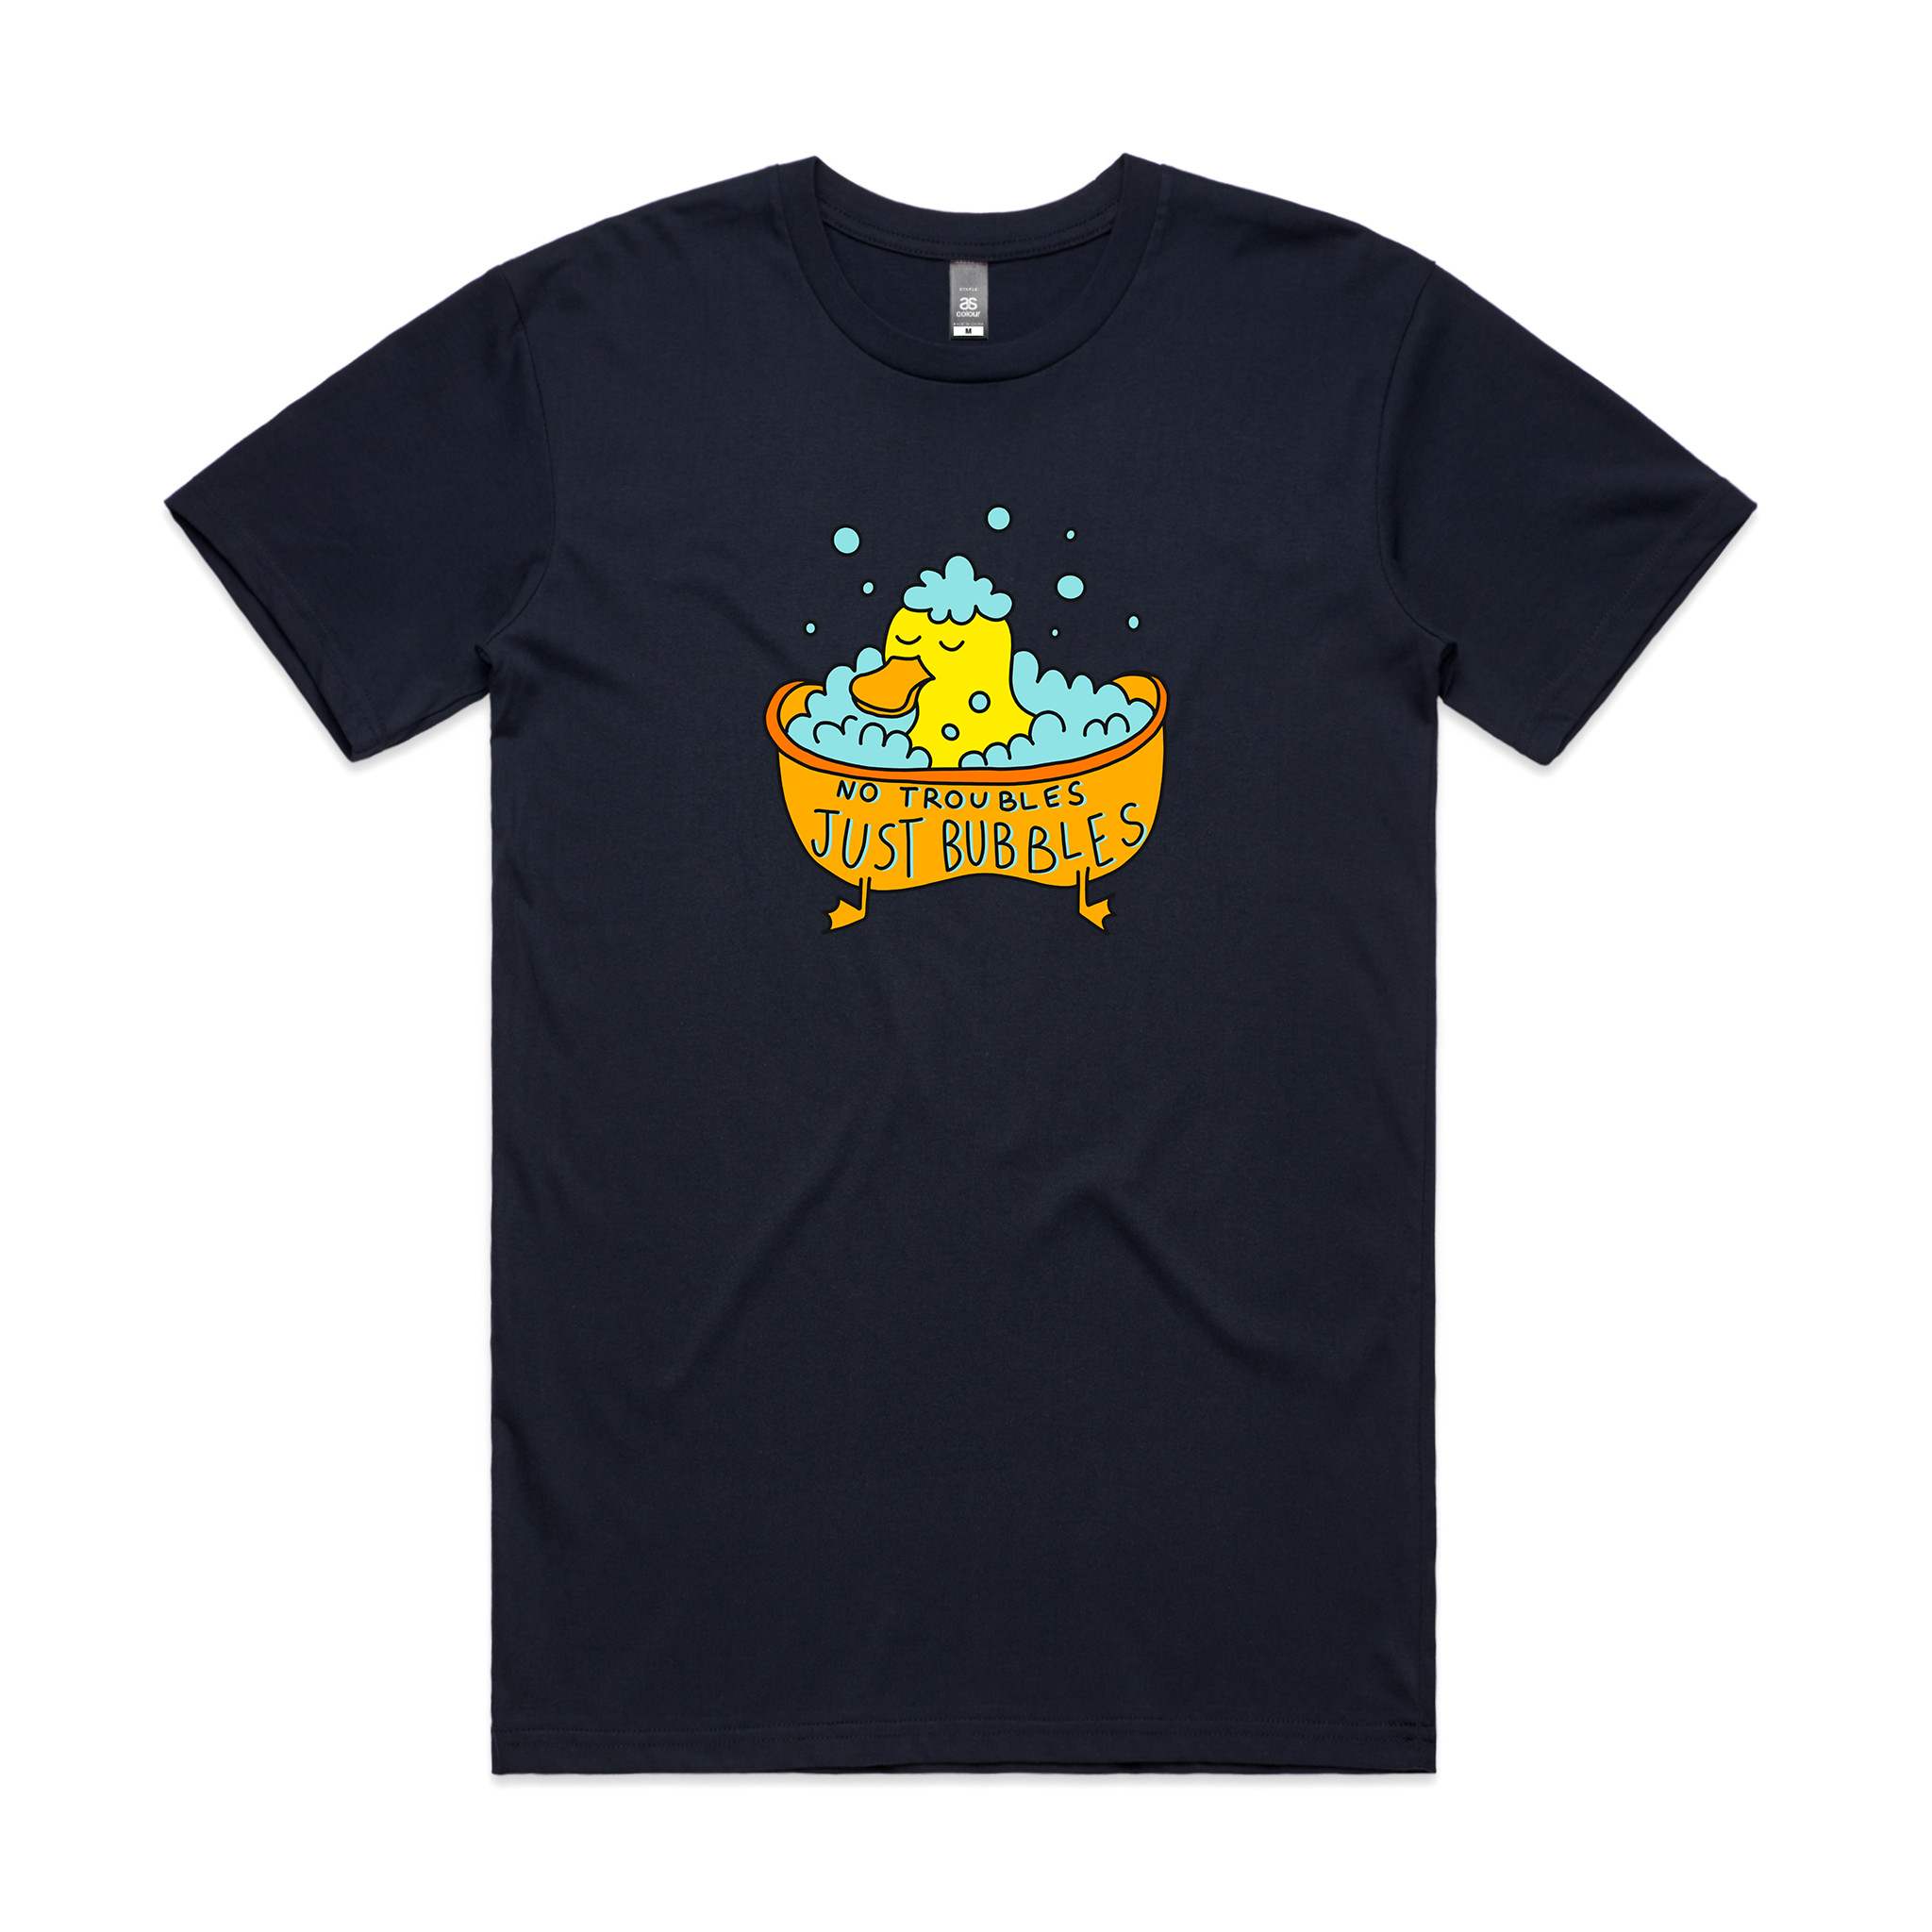 Just Bubbles Tee